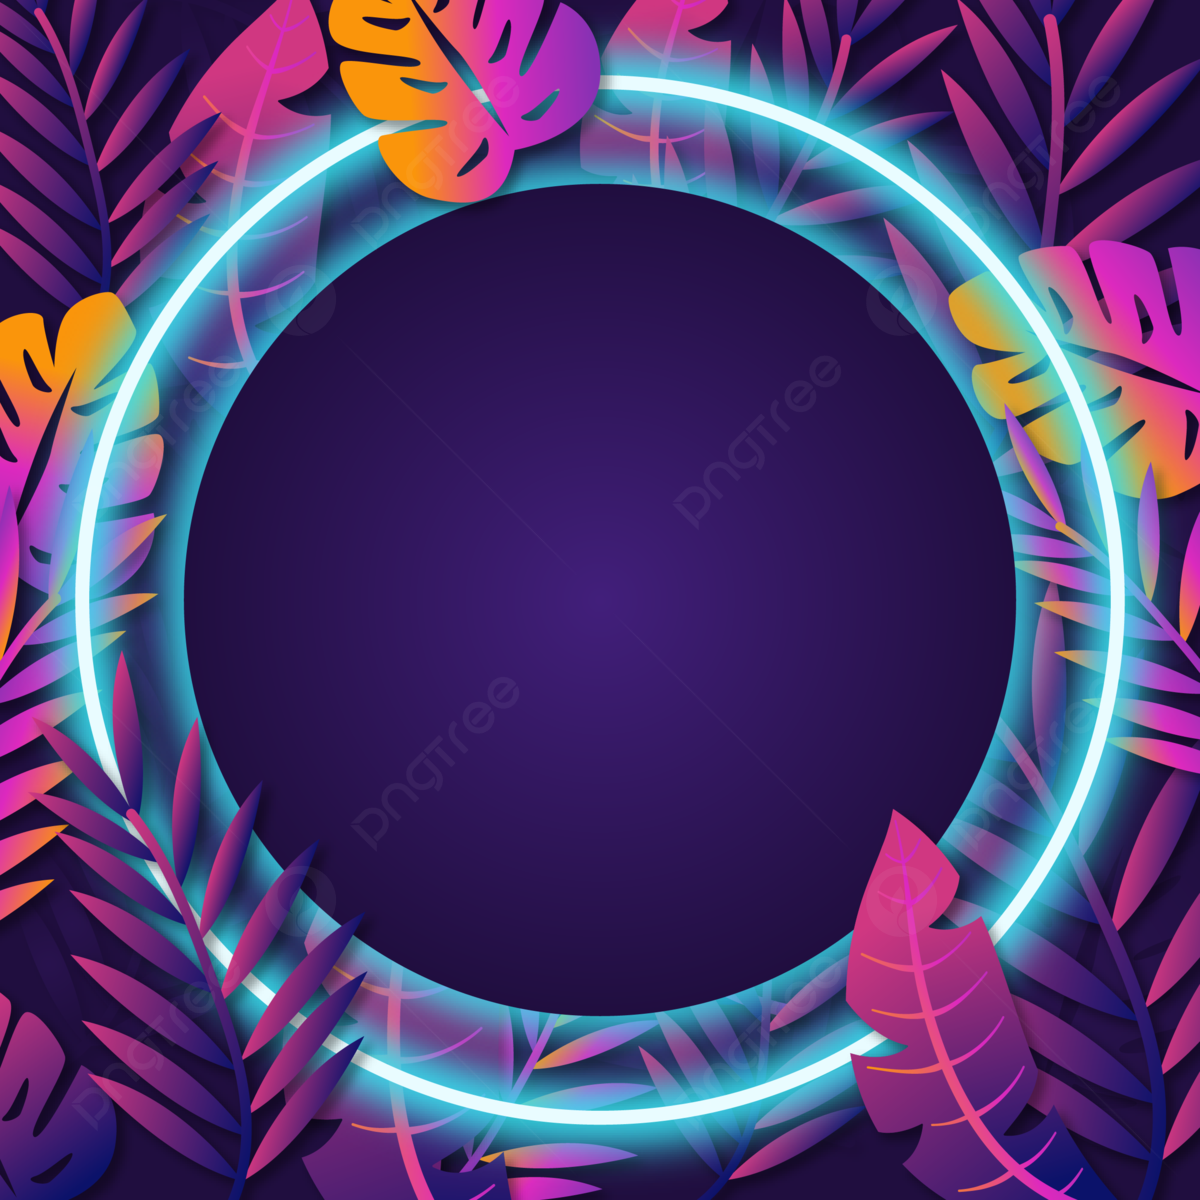 Tropical Neon With Leaves And Circle Background, Free Banner, Tropical Neon Leaves, Tropical Background Image And Wallpaper for Free Download